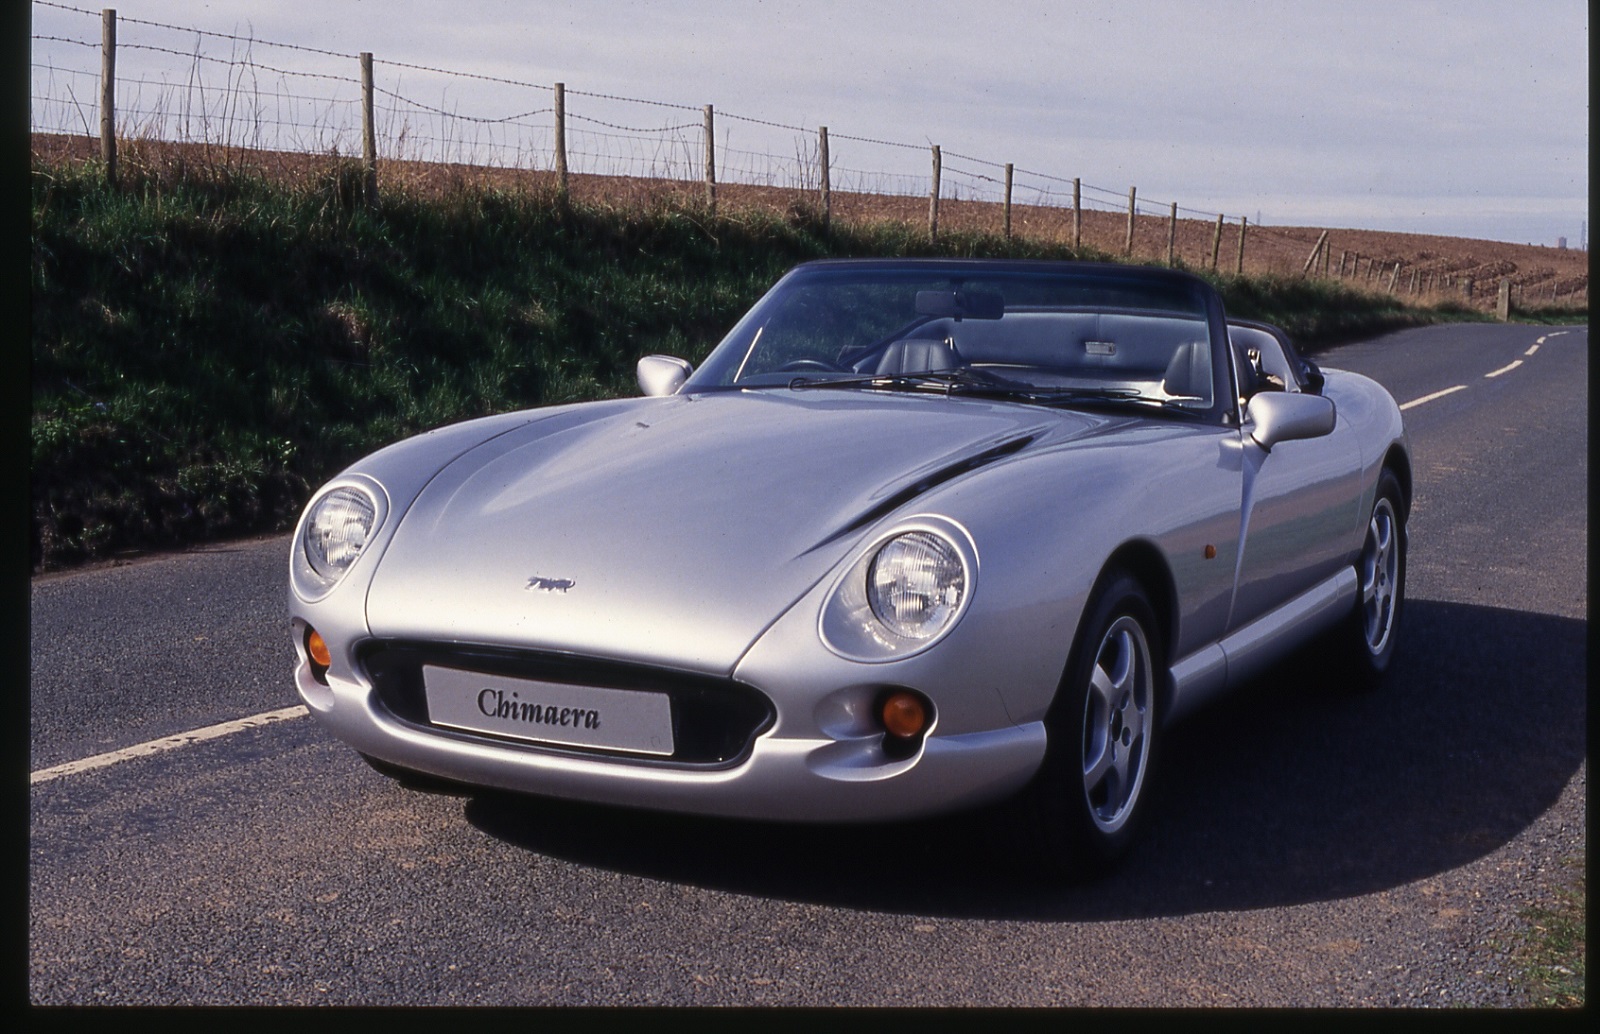 <p>TVR is a specialist British sports car maker, and in its own terms, the Chimaera was a <strong>runaway success</strong> and it helped fund the development of later models such as the Cerbera and Tuscan ranges. All Chimaeras were powered by the Buick-derived <strong>Rover V8</strong> engine, used in a variety of capacities and power outputs.</p><p>As a measure of its popularity, the Chimaera sold more in its 12-year run than TVR had managed with all its models in the previous 25 years.</p>